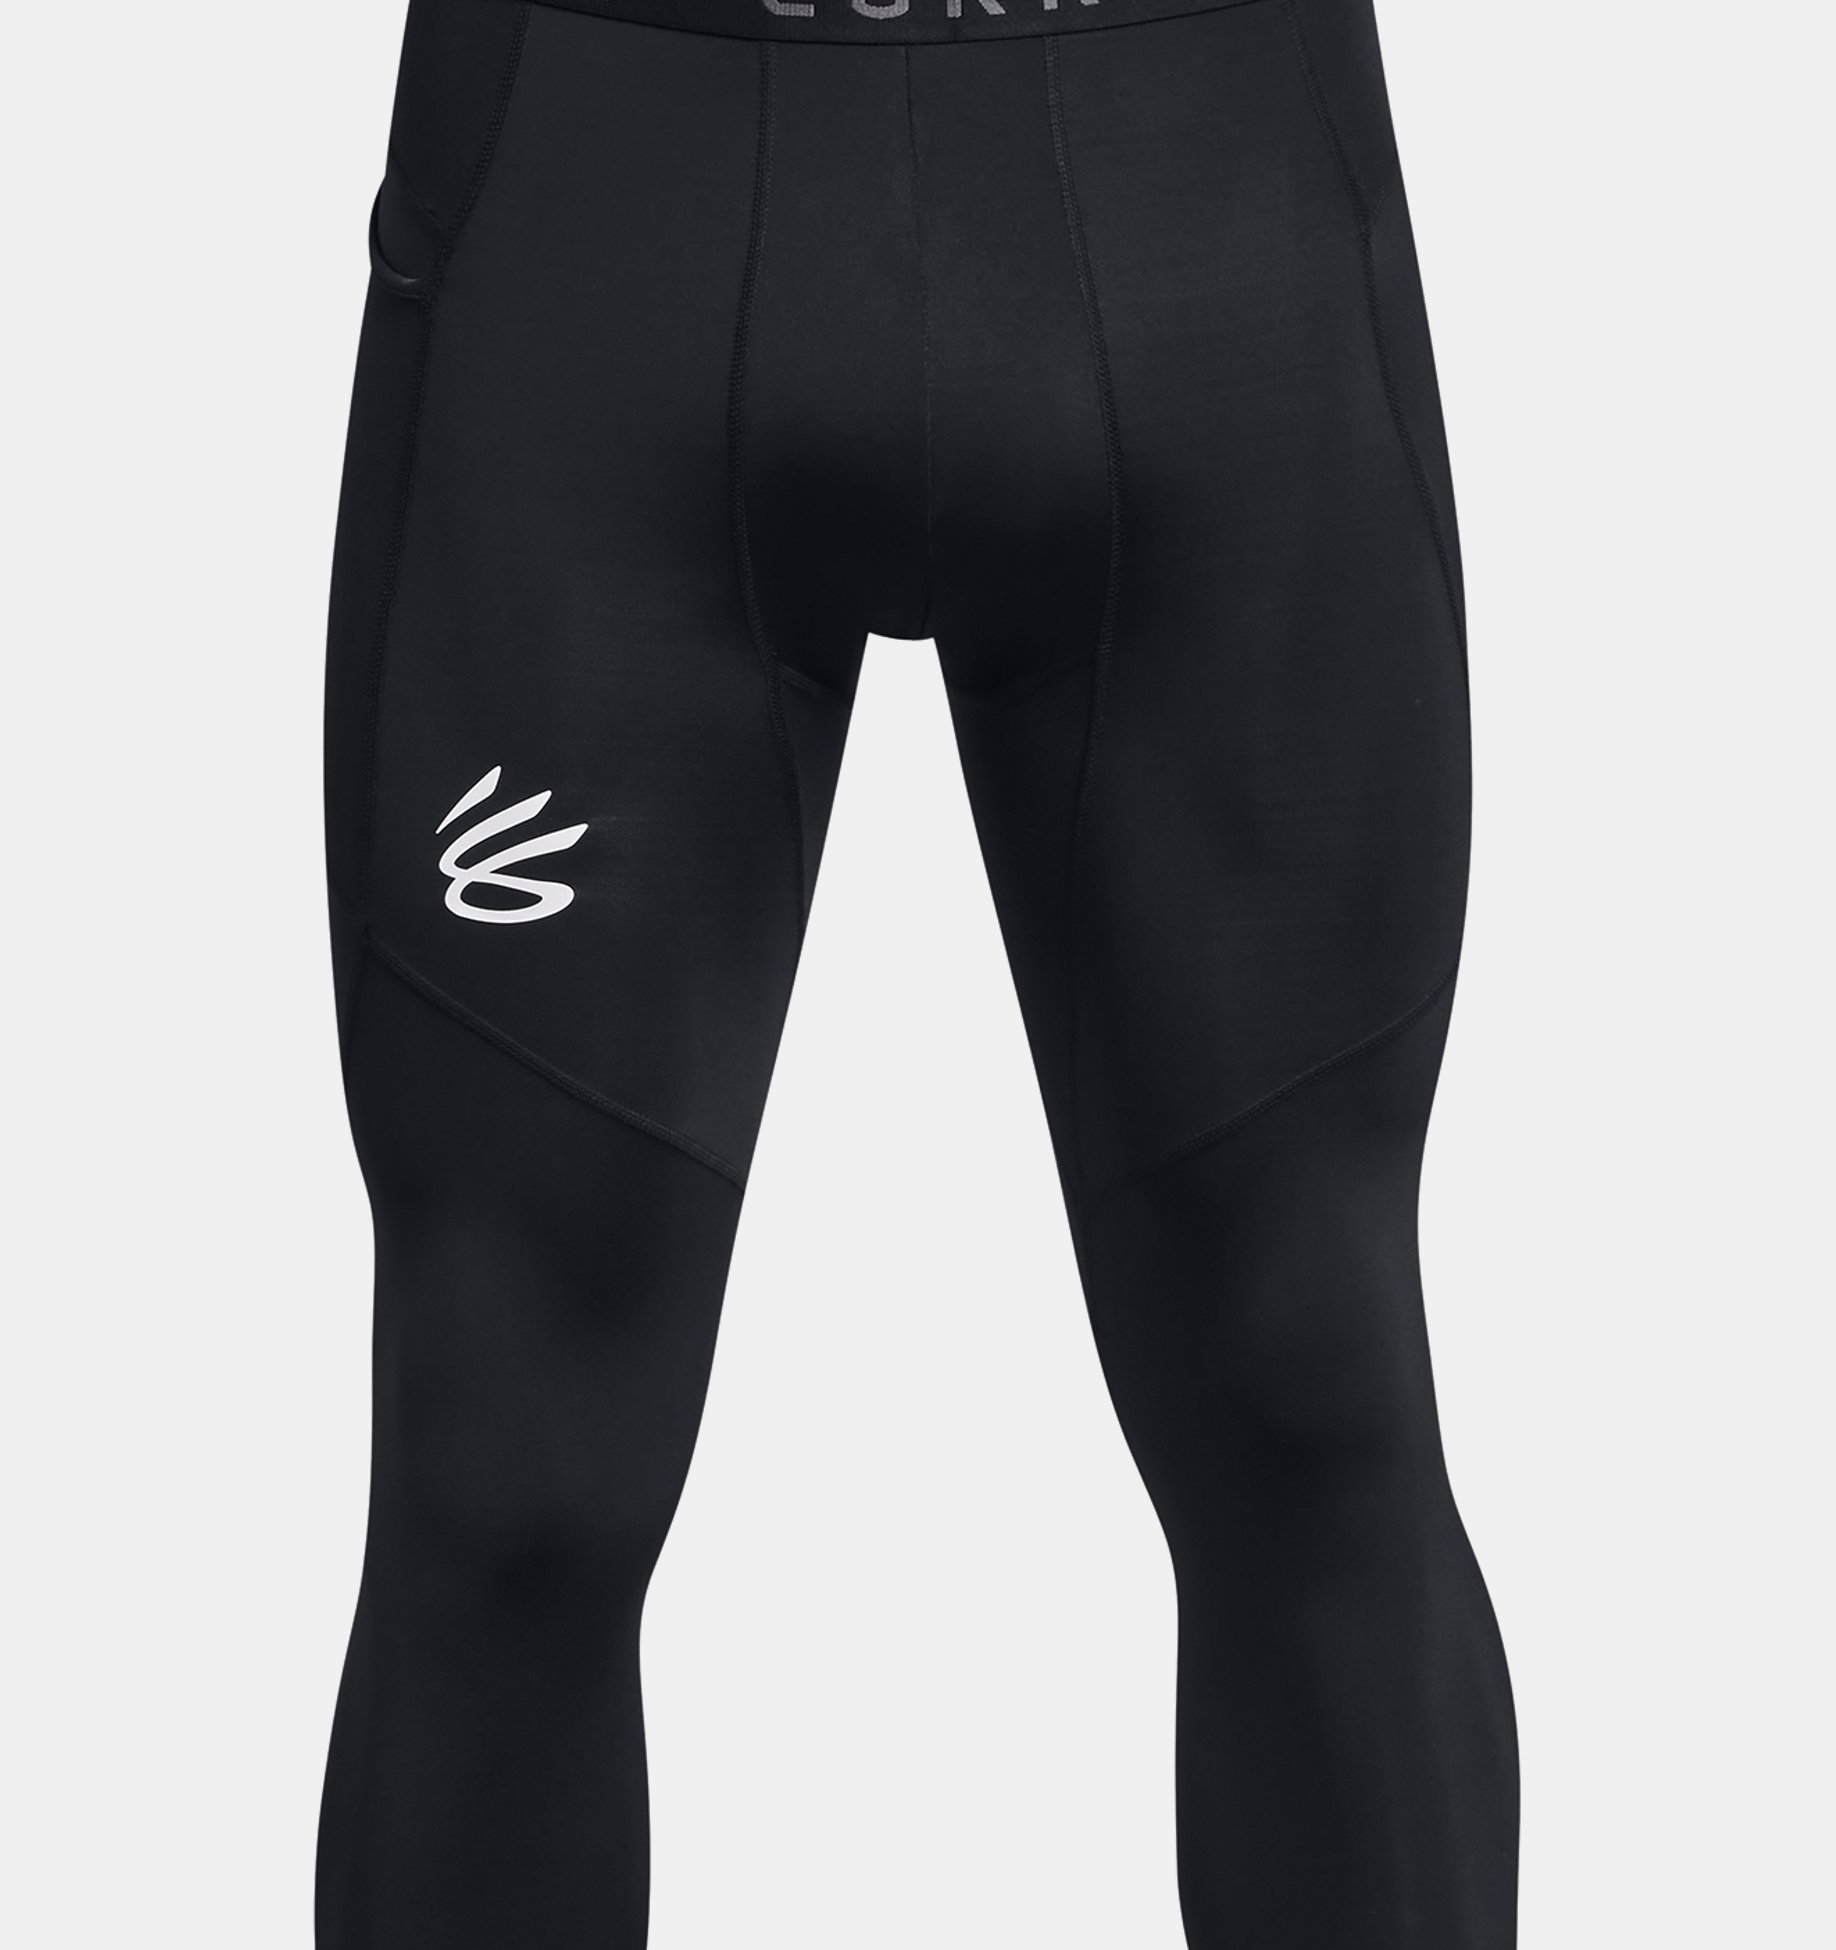 https://underarmour.scene7.com/is/image/Underarmour/PS1379828-003_HF?rp=standard-0pad|pdpZoomDesktop&scl=0.72&fmt=jpg&qlt=85&resMode=sharp2&cache=on,on&bgc=f0f0f0&wid=1836&hei=1950&size=1500,1500